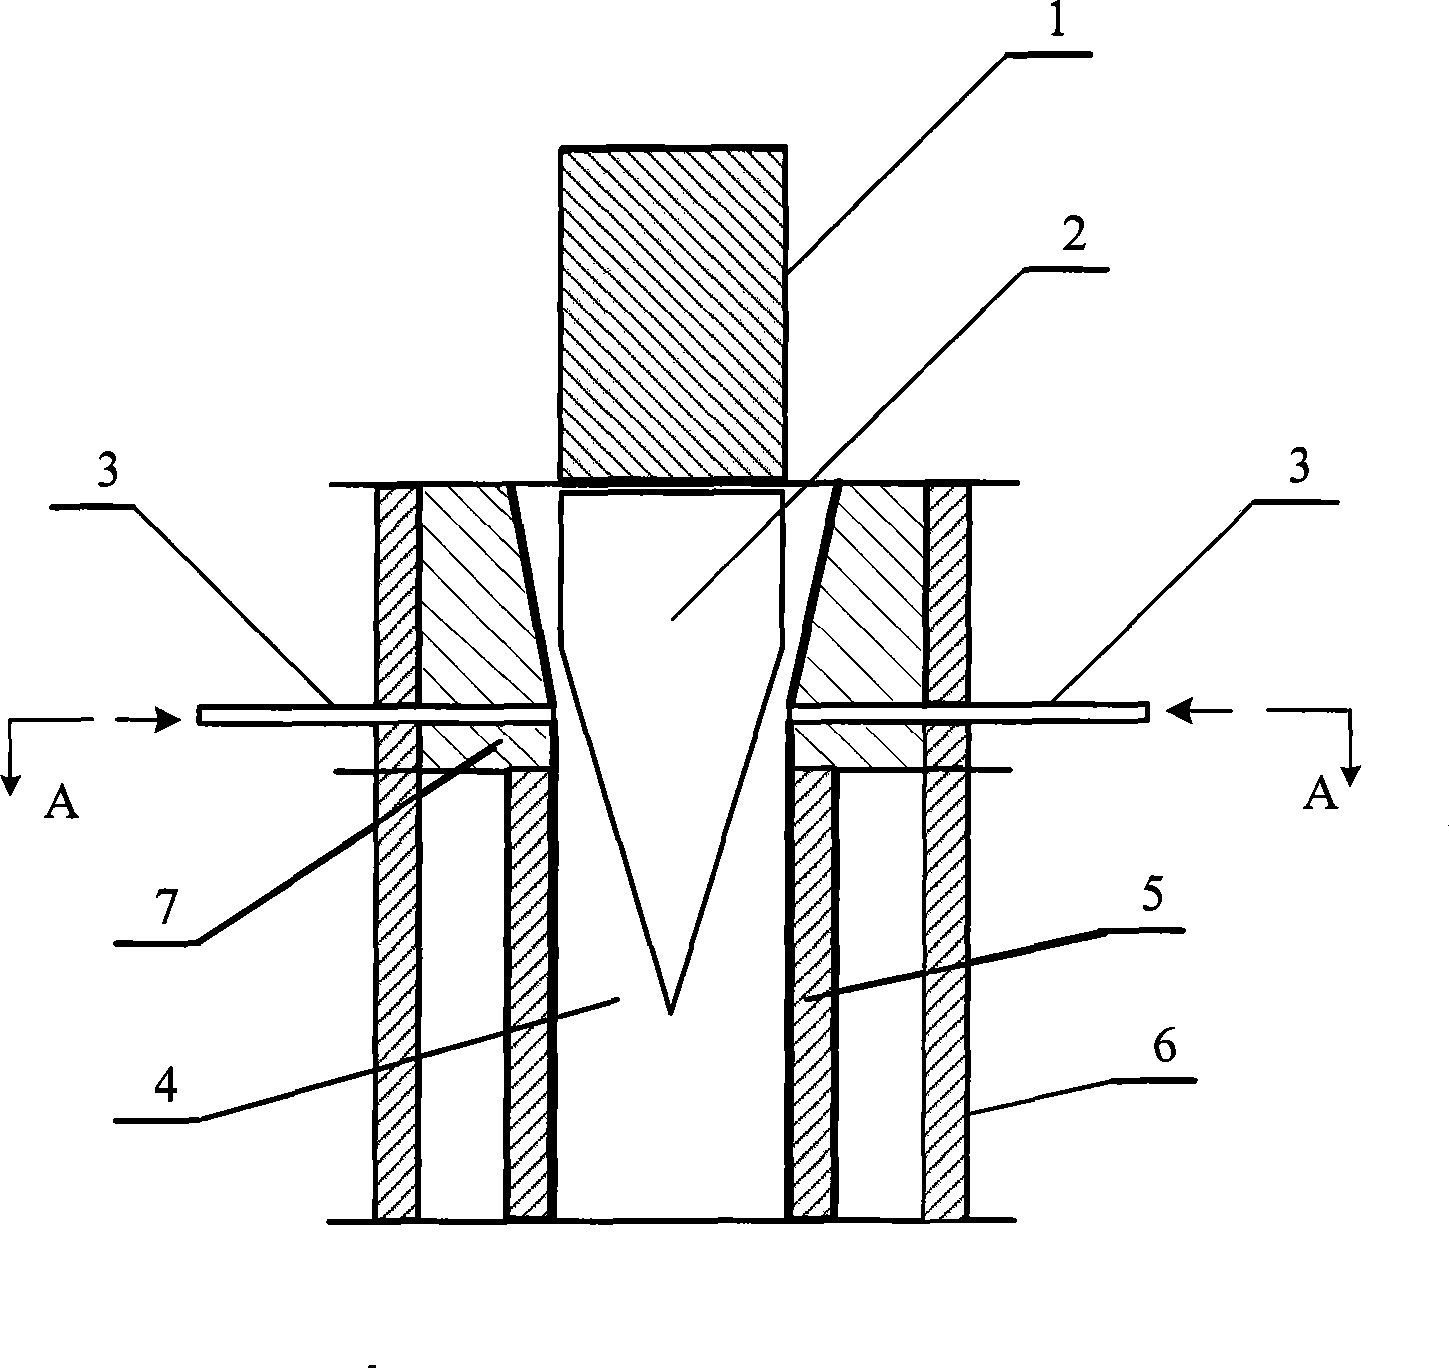 Coal powder entrance structure applied to reactor for producing acetylene with plasma coal cracking